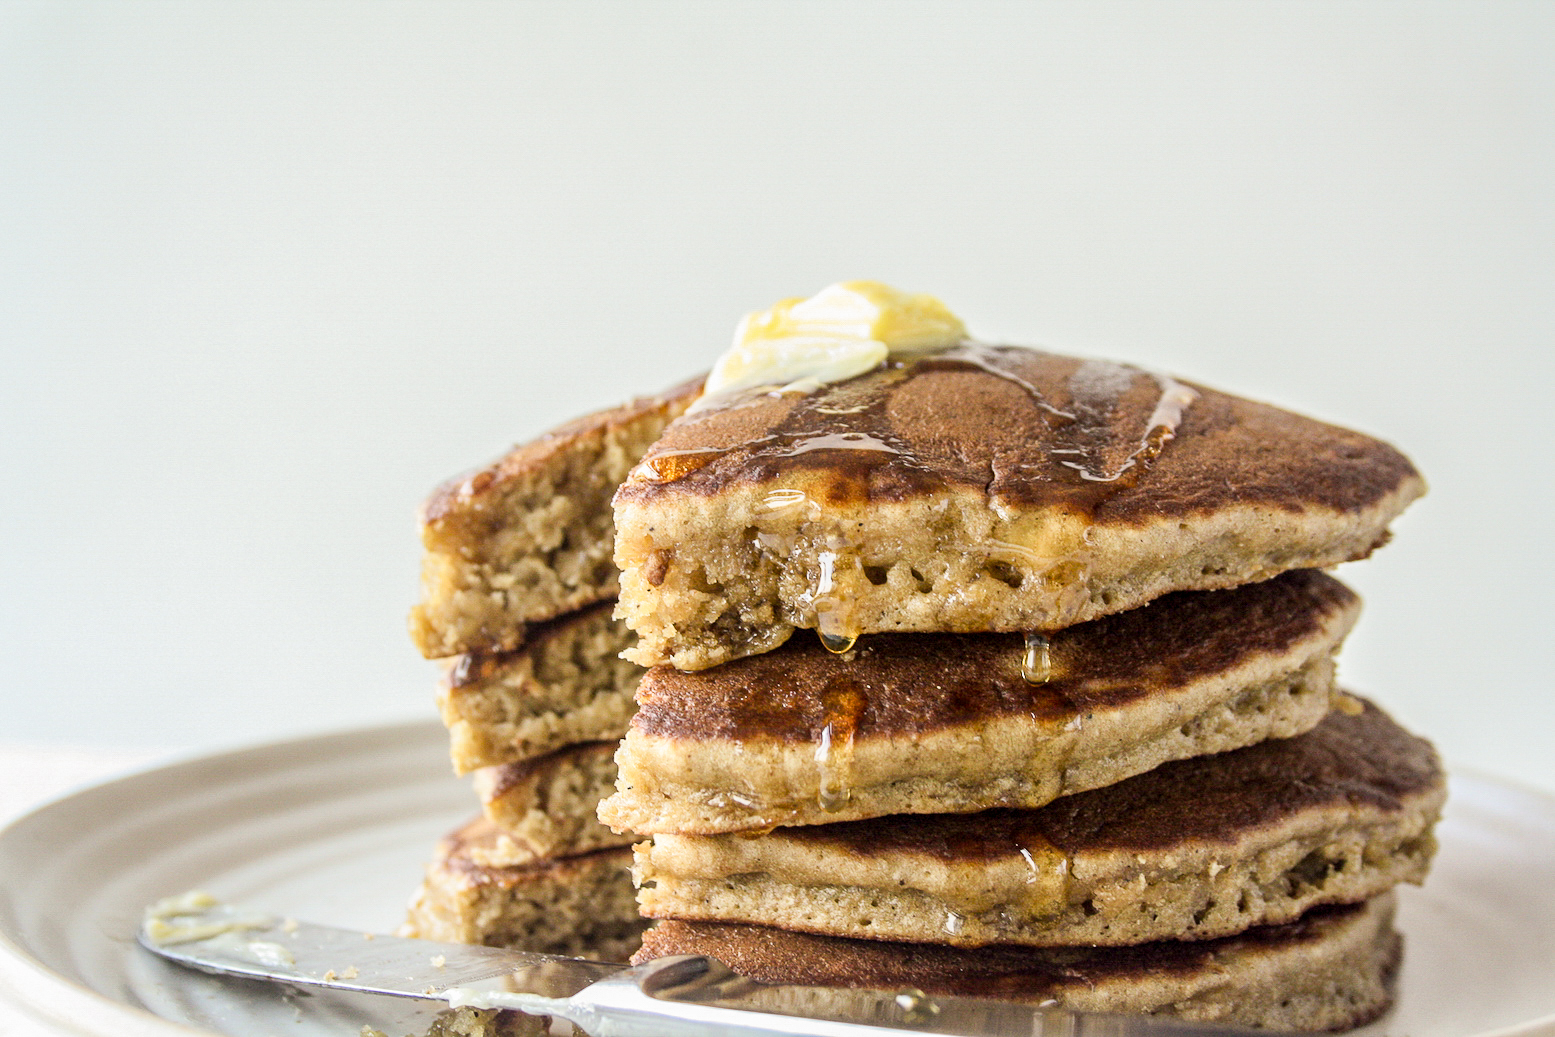 Soft and fluffy banana pancakes made with oat flour!